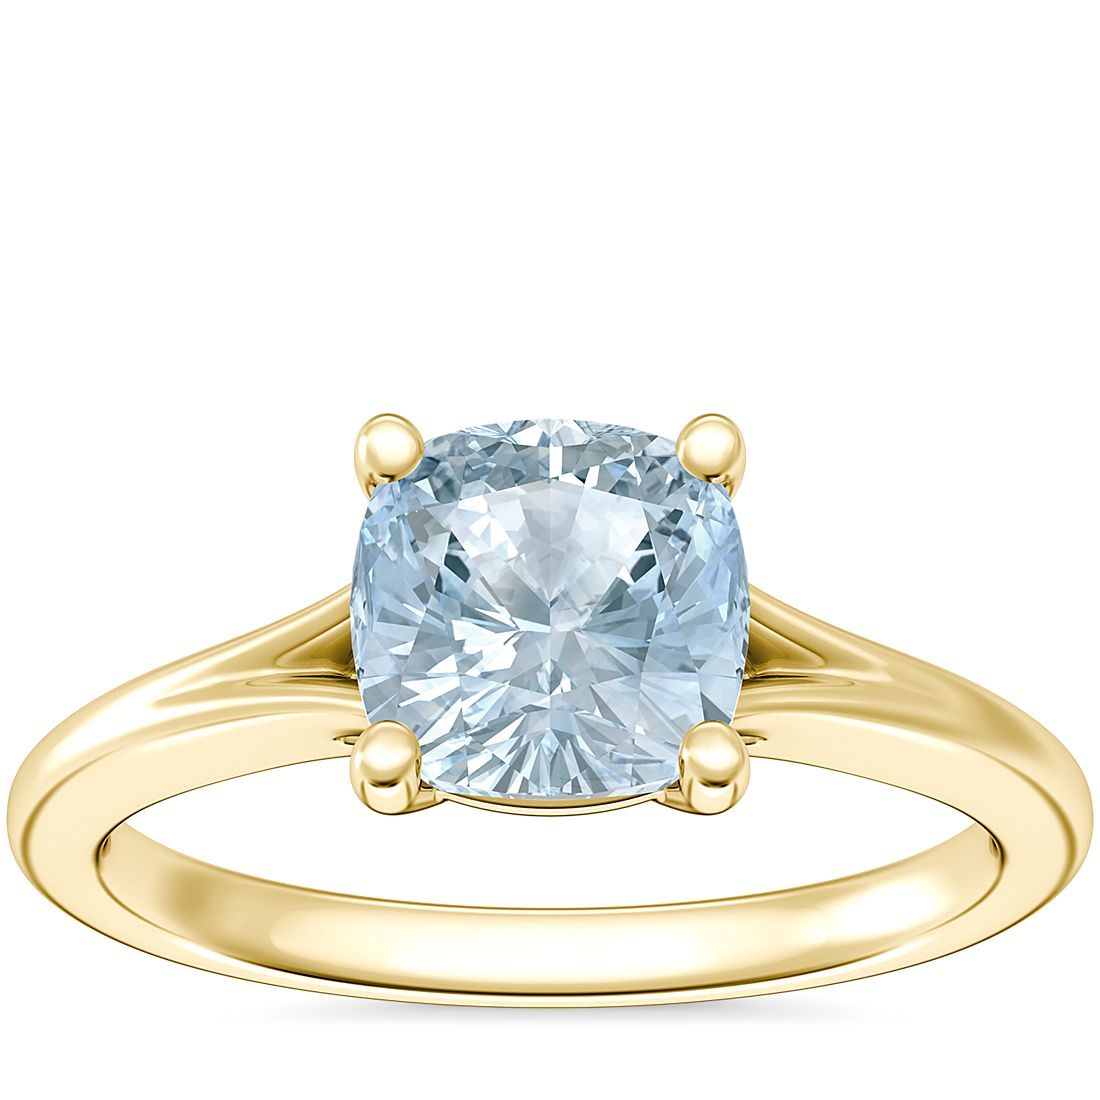 Petite Split Shank Solitaire Engagement Ring with Cushion Aquamarine in 18k Yellow Gold (6.5mm)